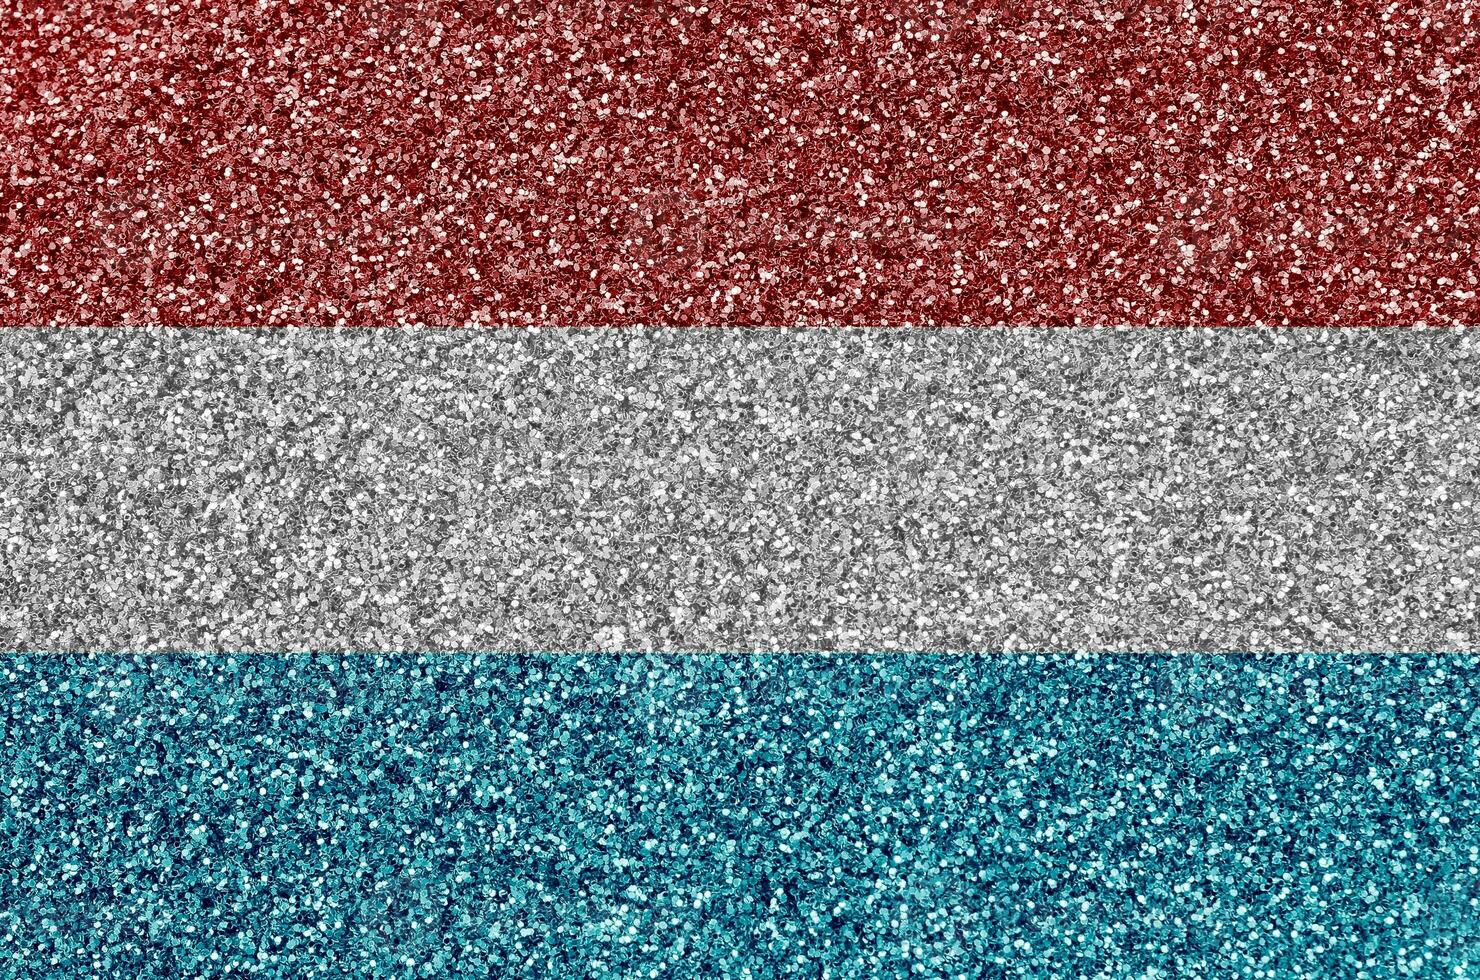 Luxembourg flag depicted on many small shiny sequins. Colorful festival background for party photo